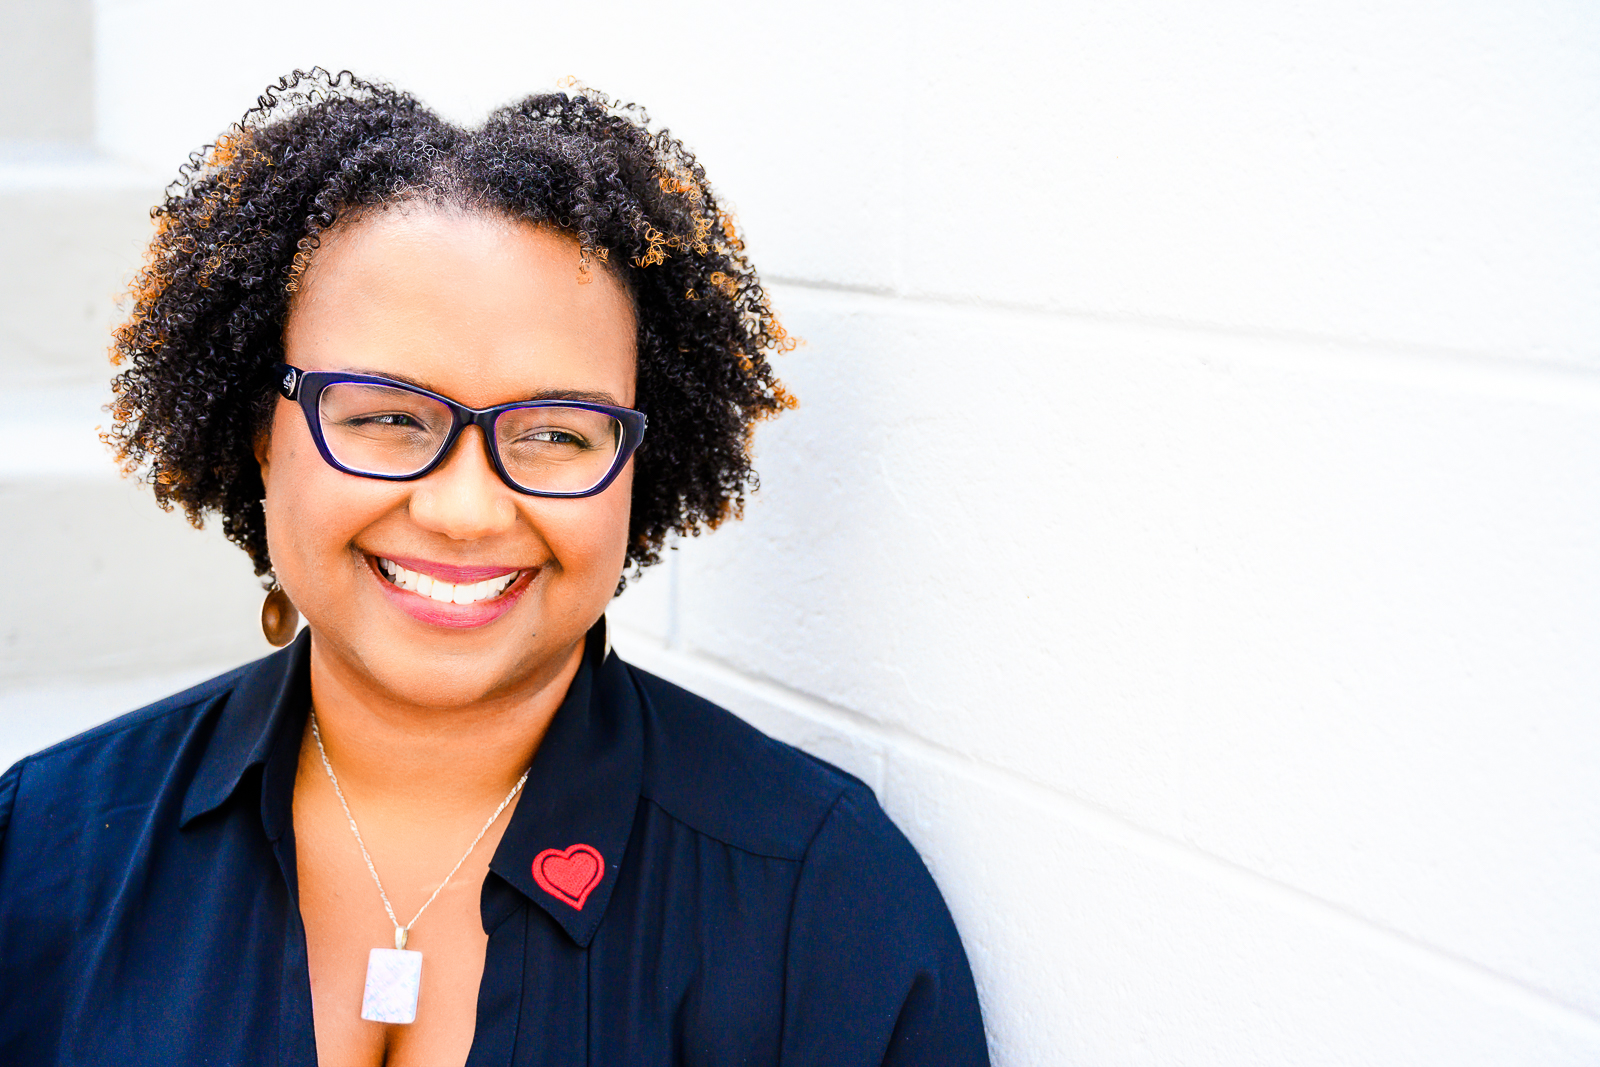 Diversity, Equity, and Inclusion and Imperfect Allyship with guest Erica Courdae